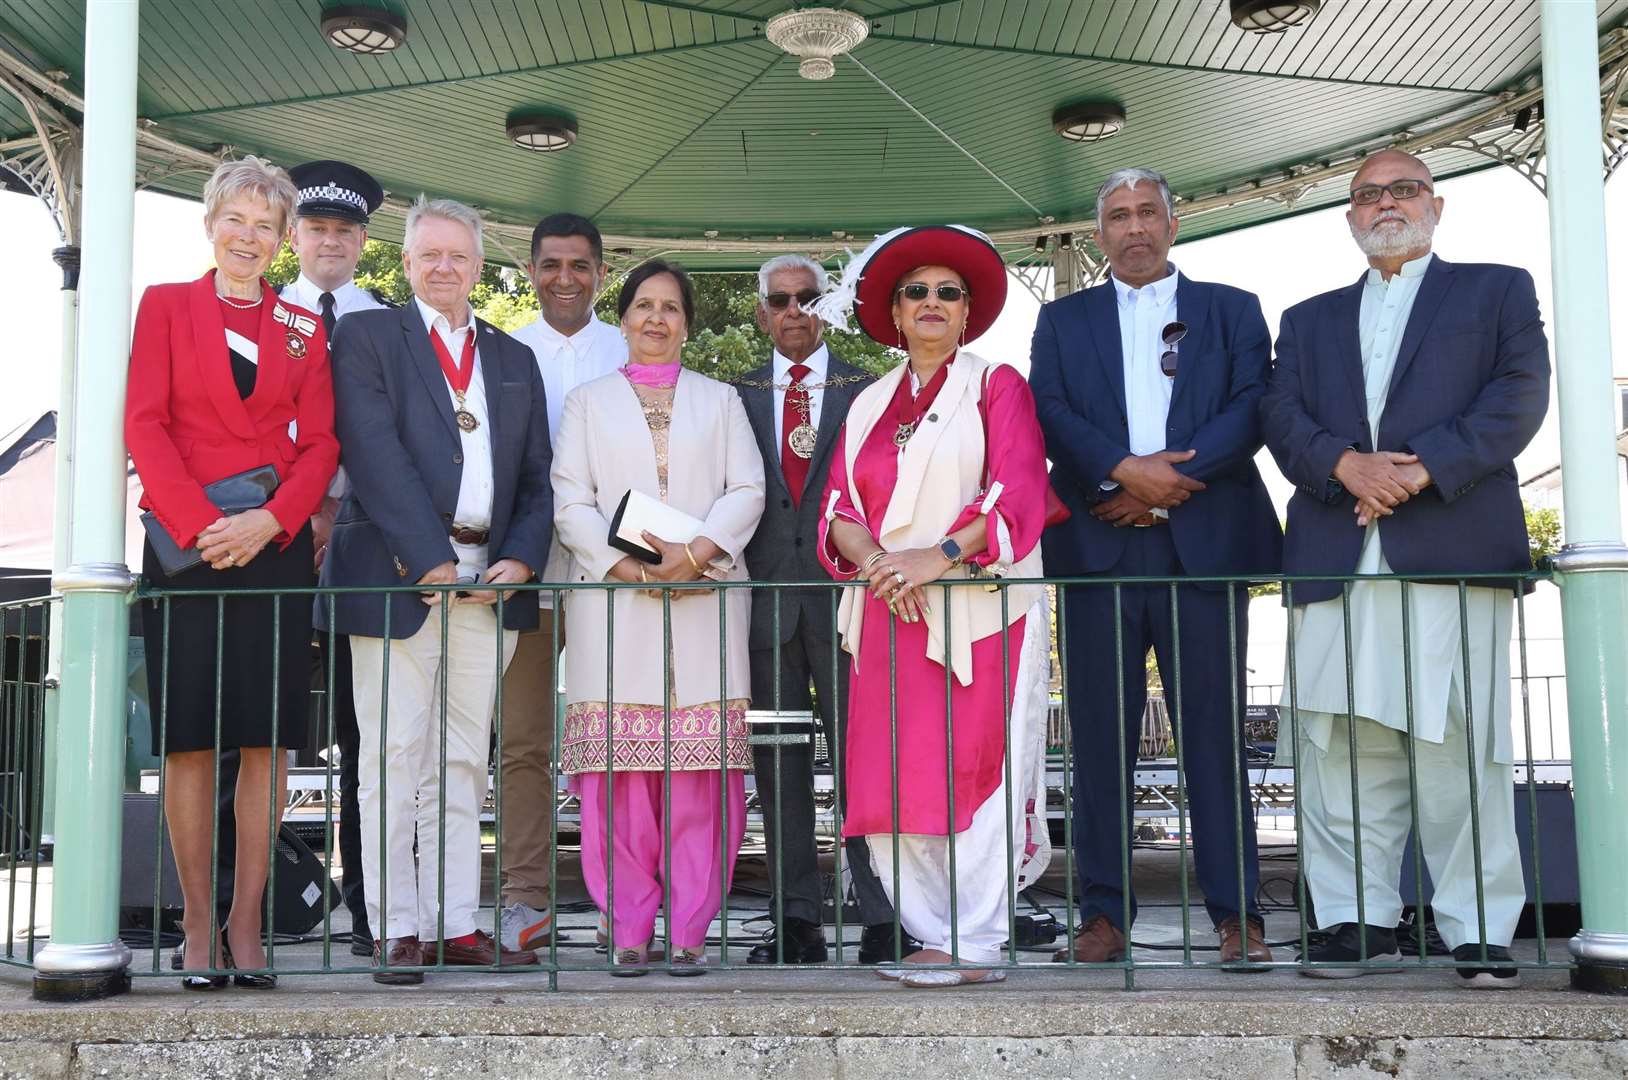 The High Sheriff Nadra Ahmed MBE DL, Deputy Lieutenant Rosemary Dymond and Mayor of Gravesham Cllr Gurdip Bungar were in attendance. Picture: Andy Barnes